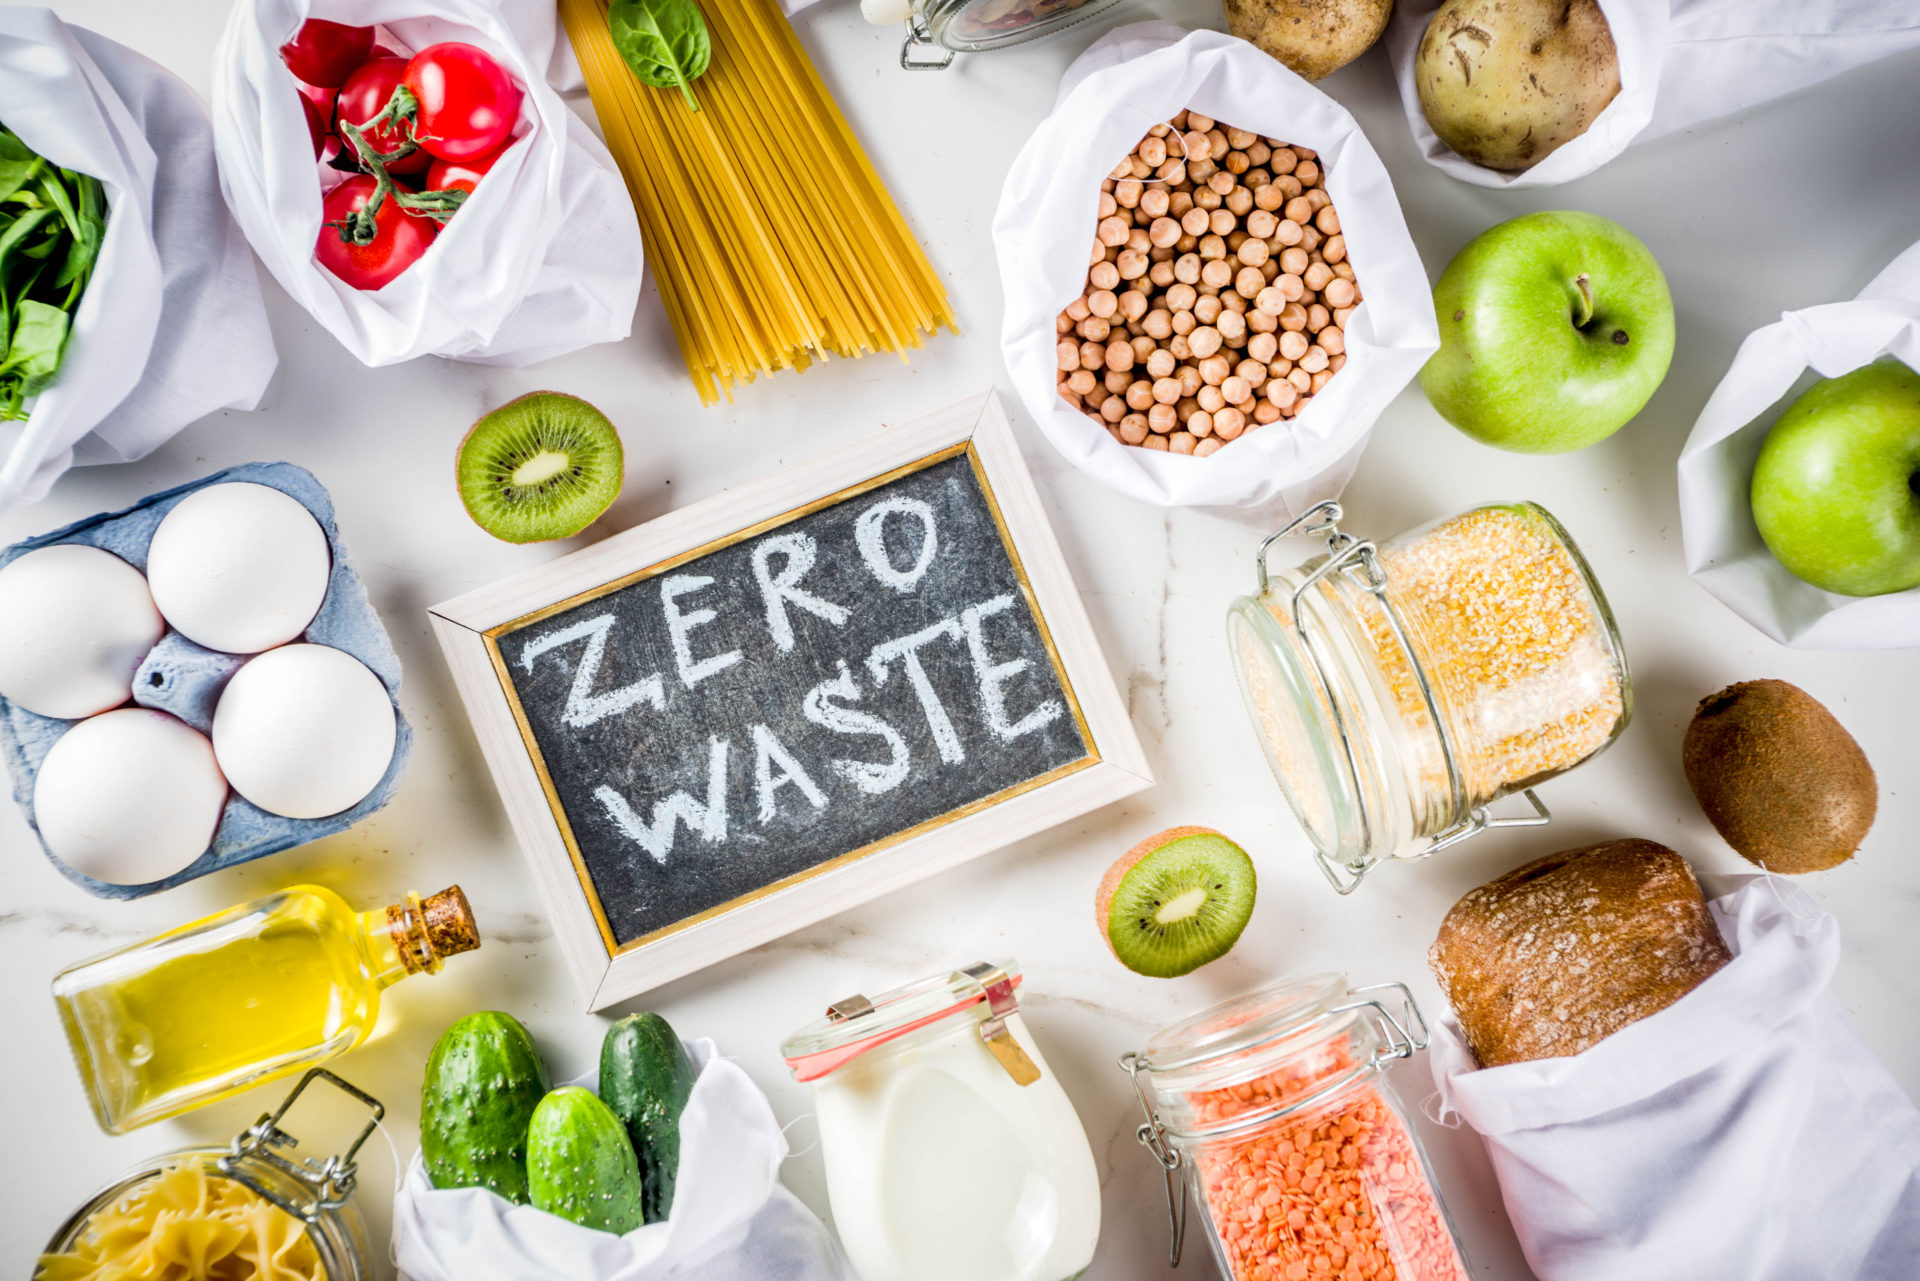 Startups Raise Record Sums To Cut Food Waste